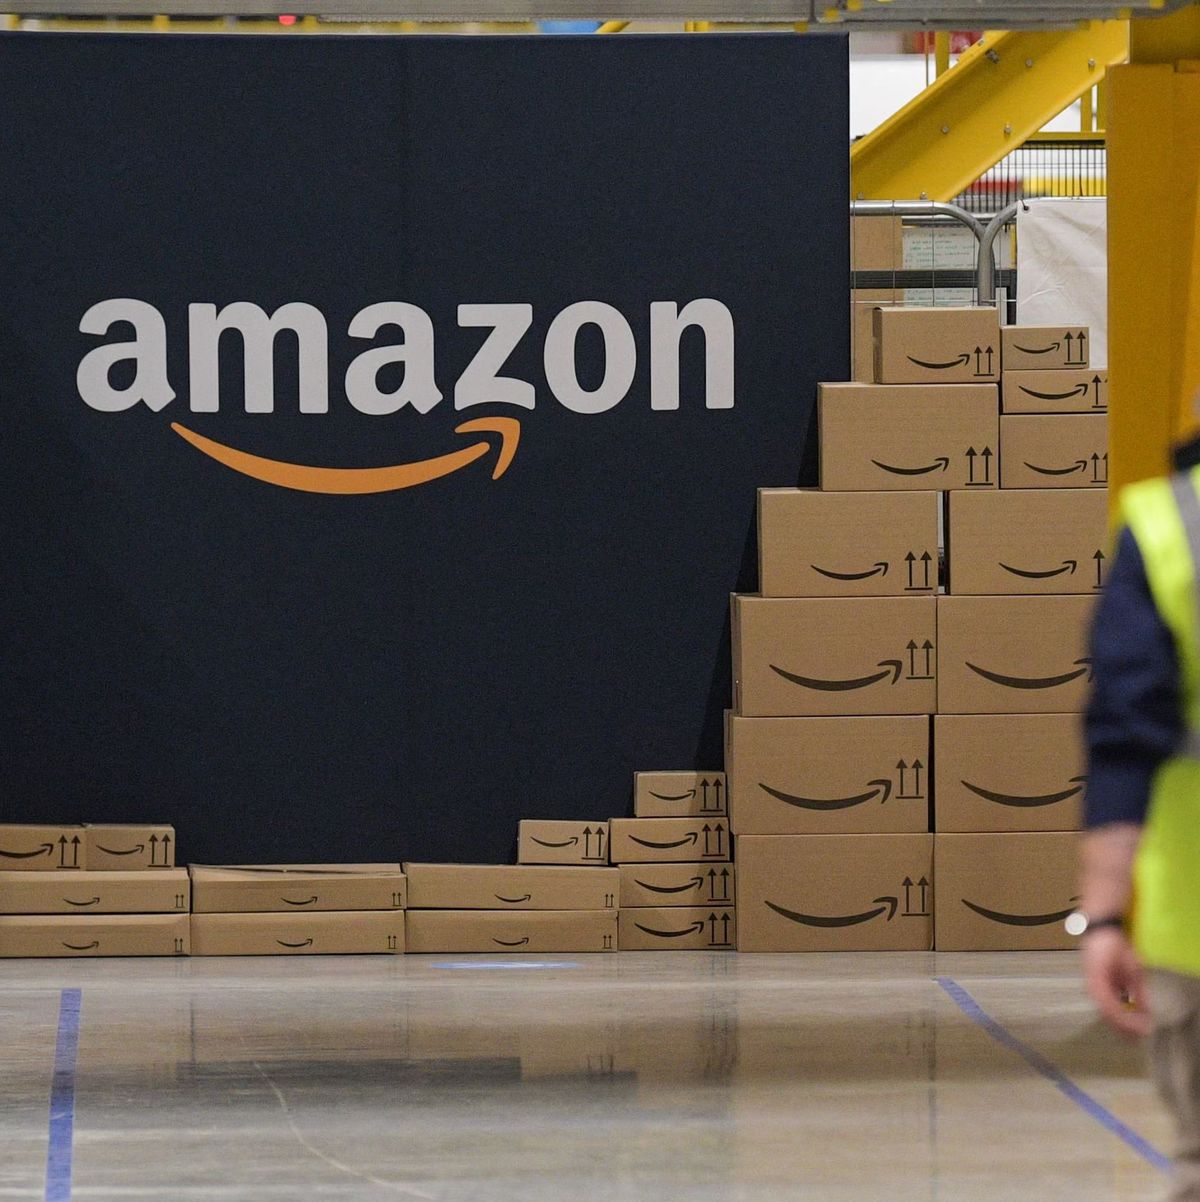 https://hips.hearstapps.com/hmg-prod/images/an-us-giant-amazon-employee-passes-by-its-logo-on-the-news-photo-1663354882.jpg?crop=0.514xw:0.772xh;0.152xw,0&resize=1200:*